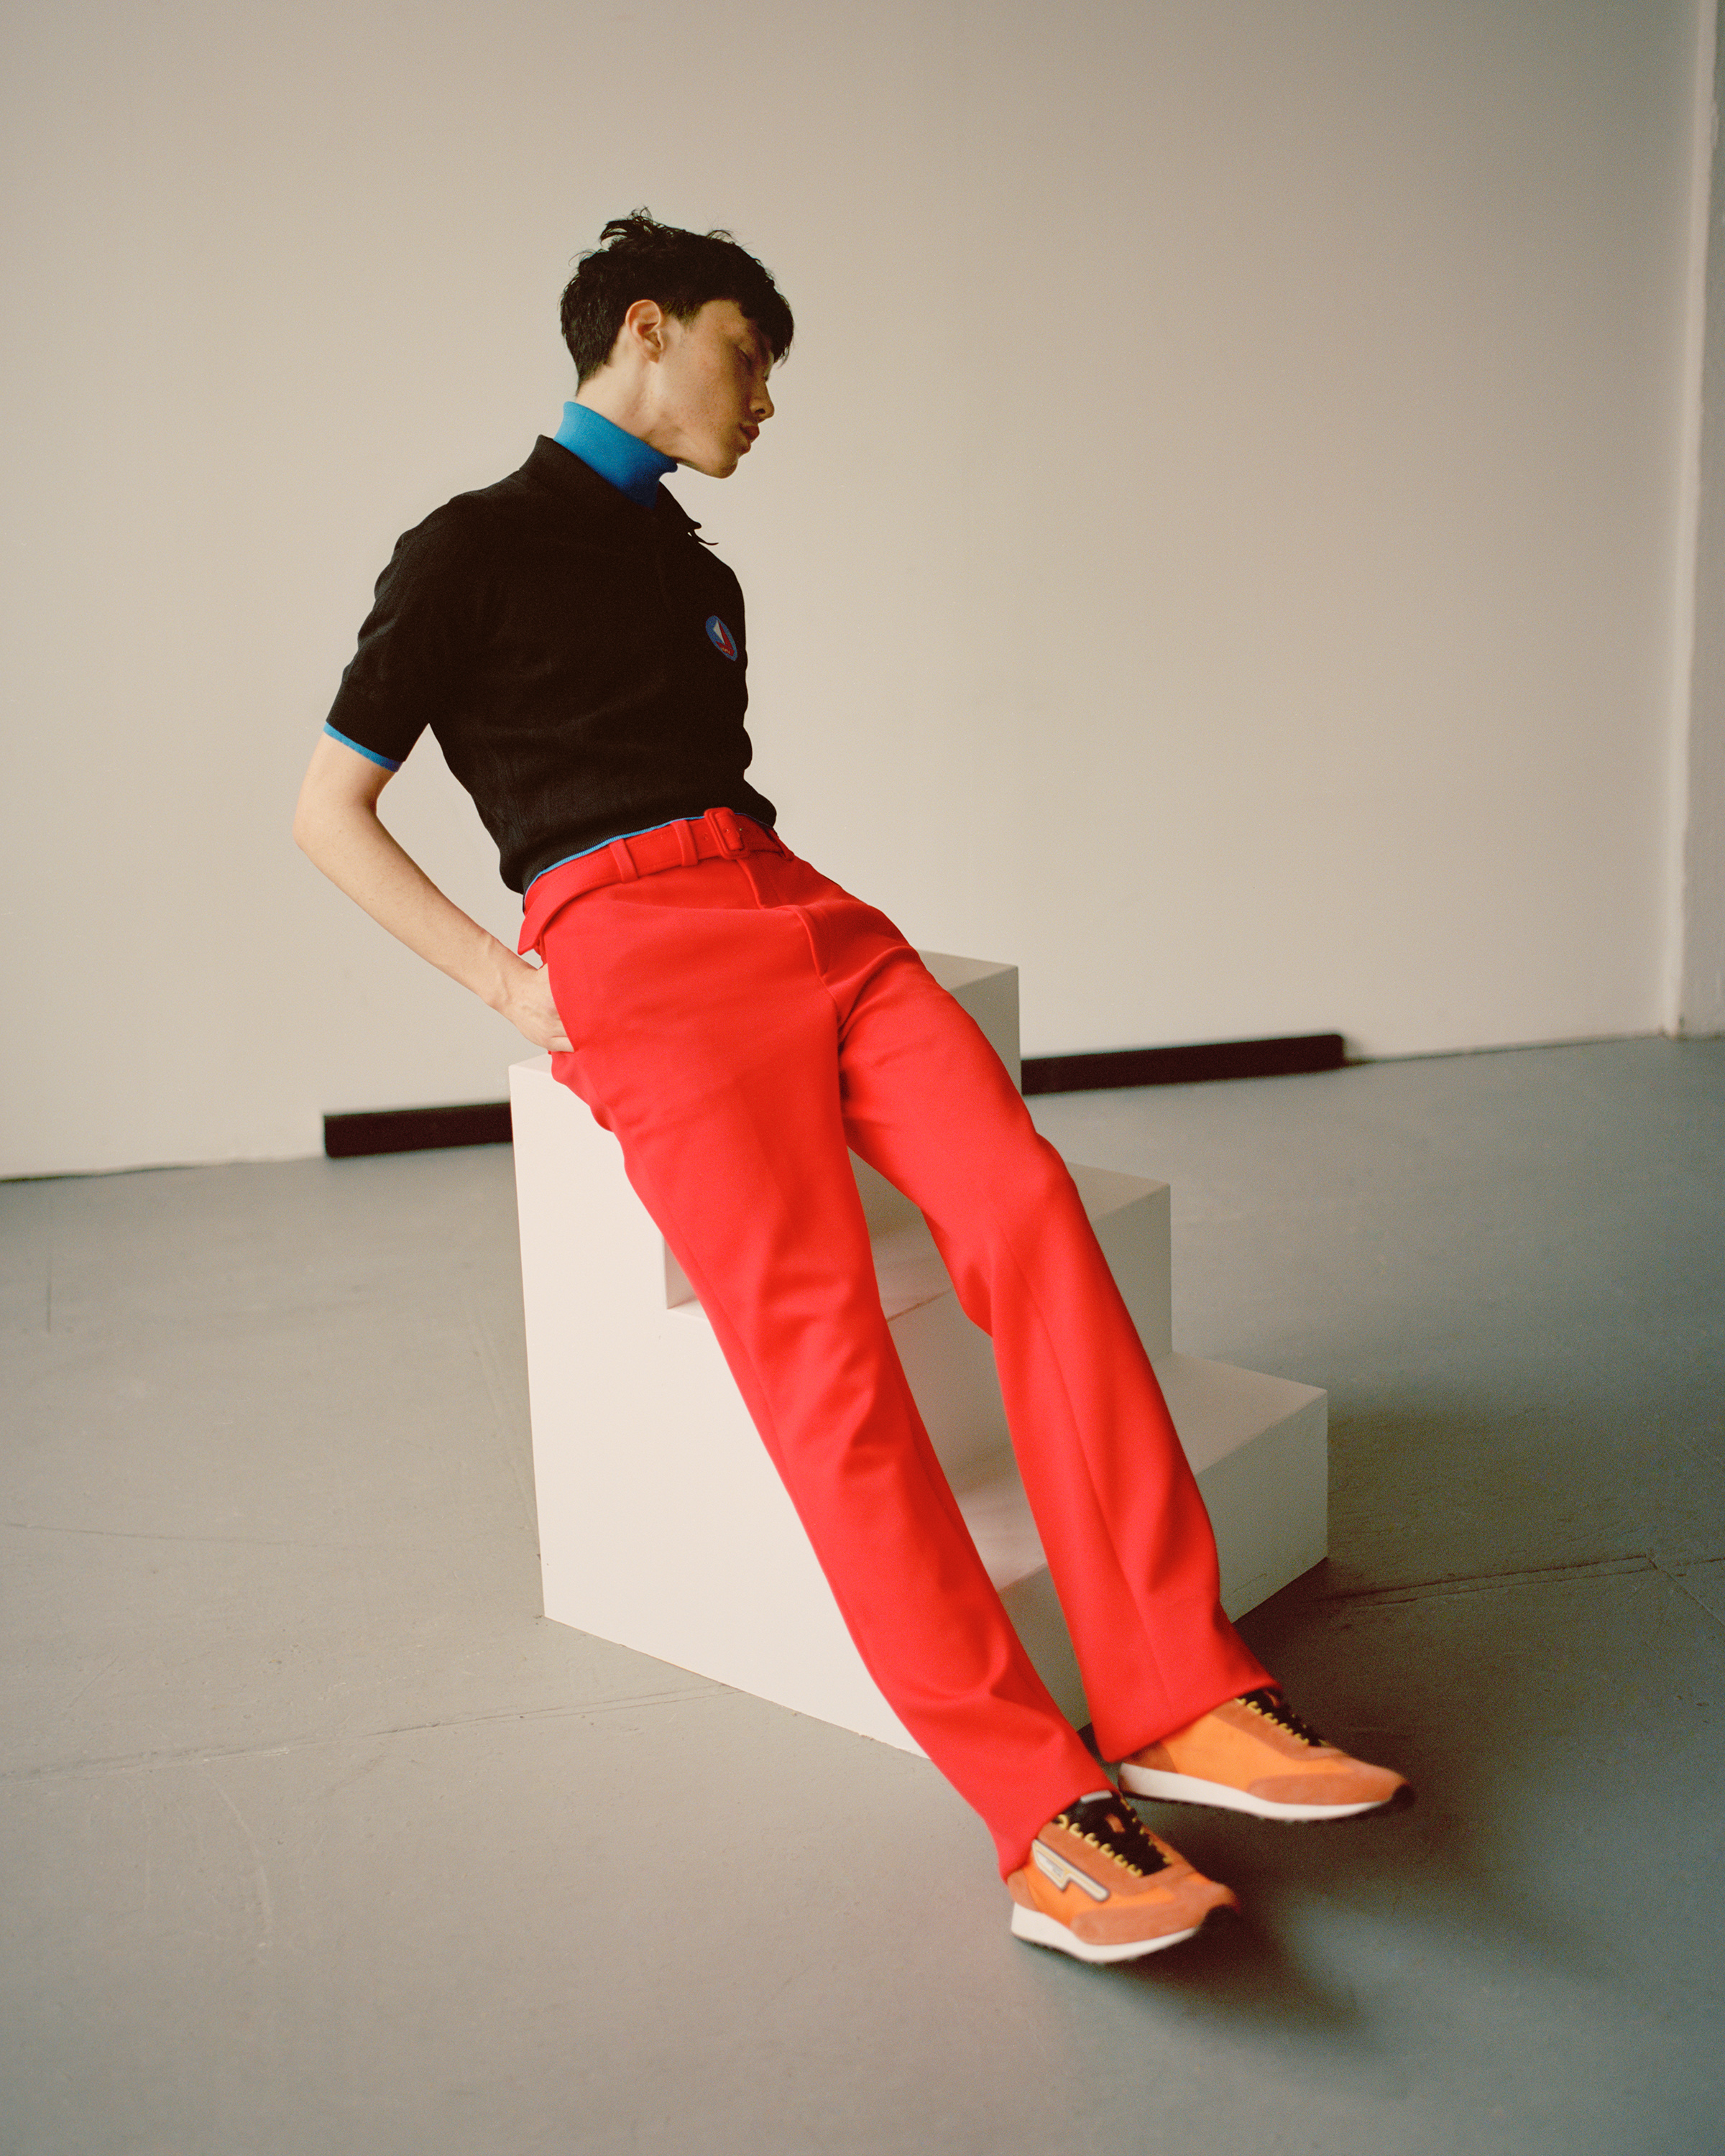  Prada (FULL LOOK) Technical jersey trousers, Cotton jacquard polo shirt, Cotton jacquard turtleneck sweater, Suede and nylon sneakers